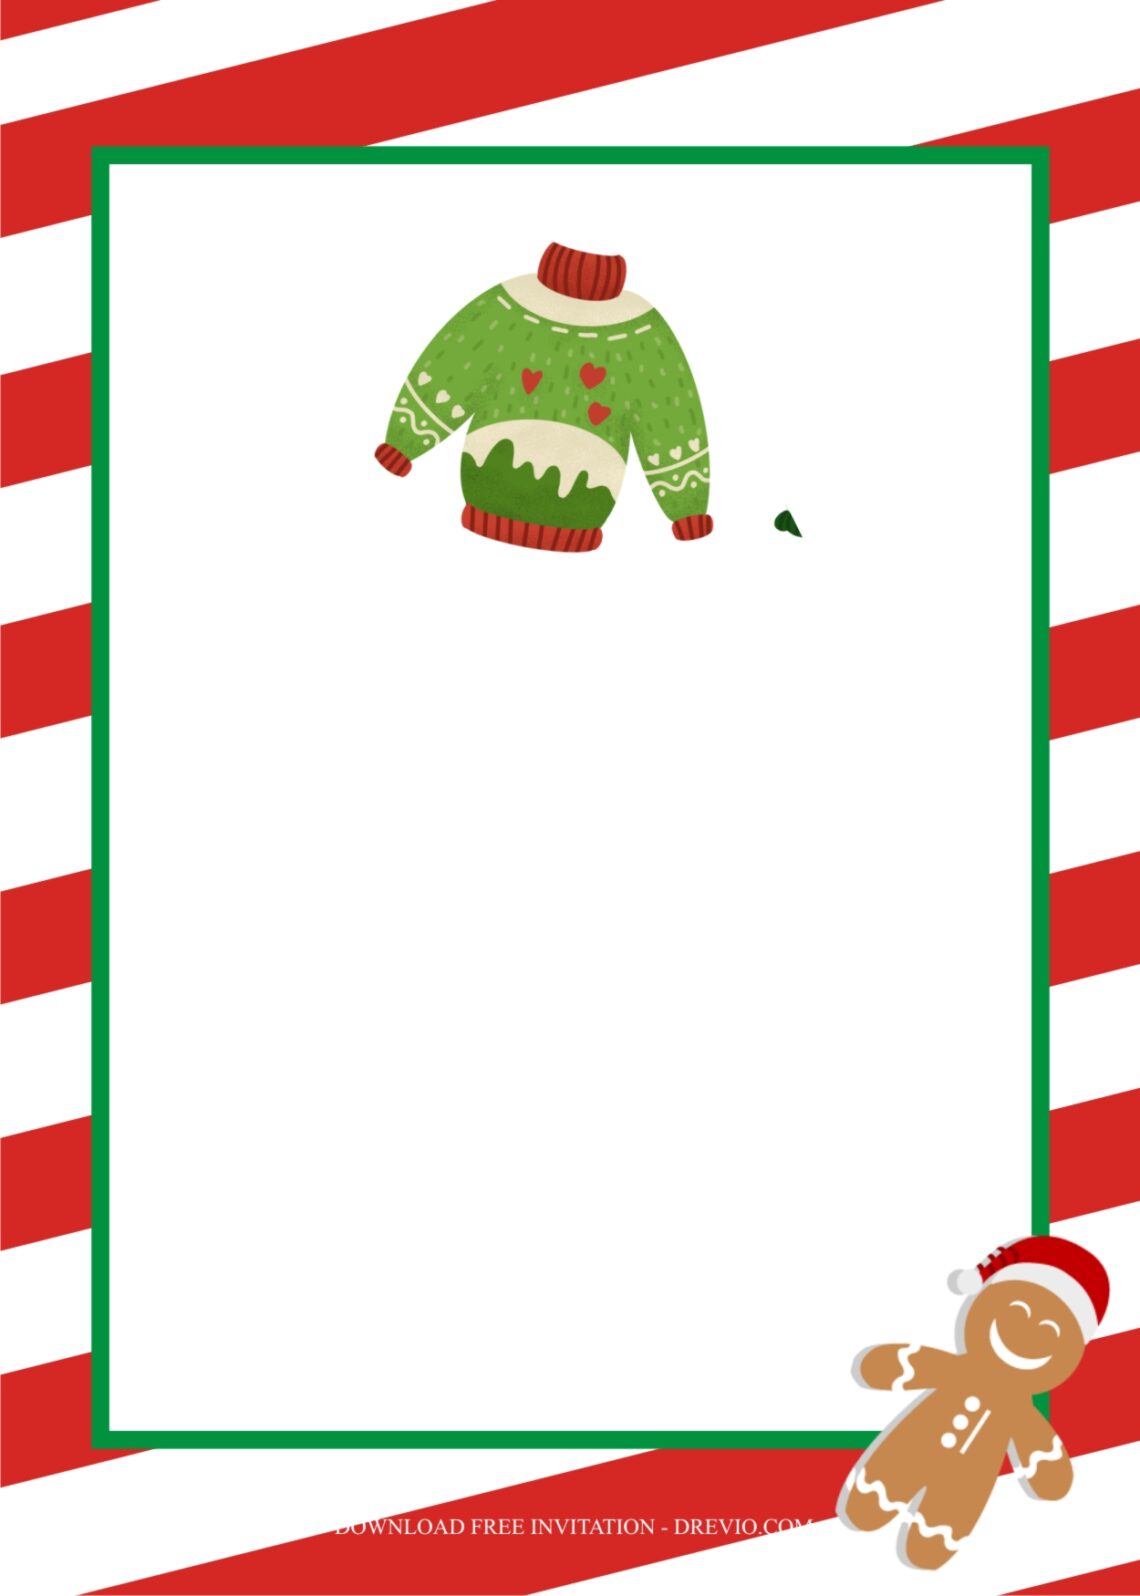 ugly-sweater-party-invitation-template6-download-hundreds-free